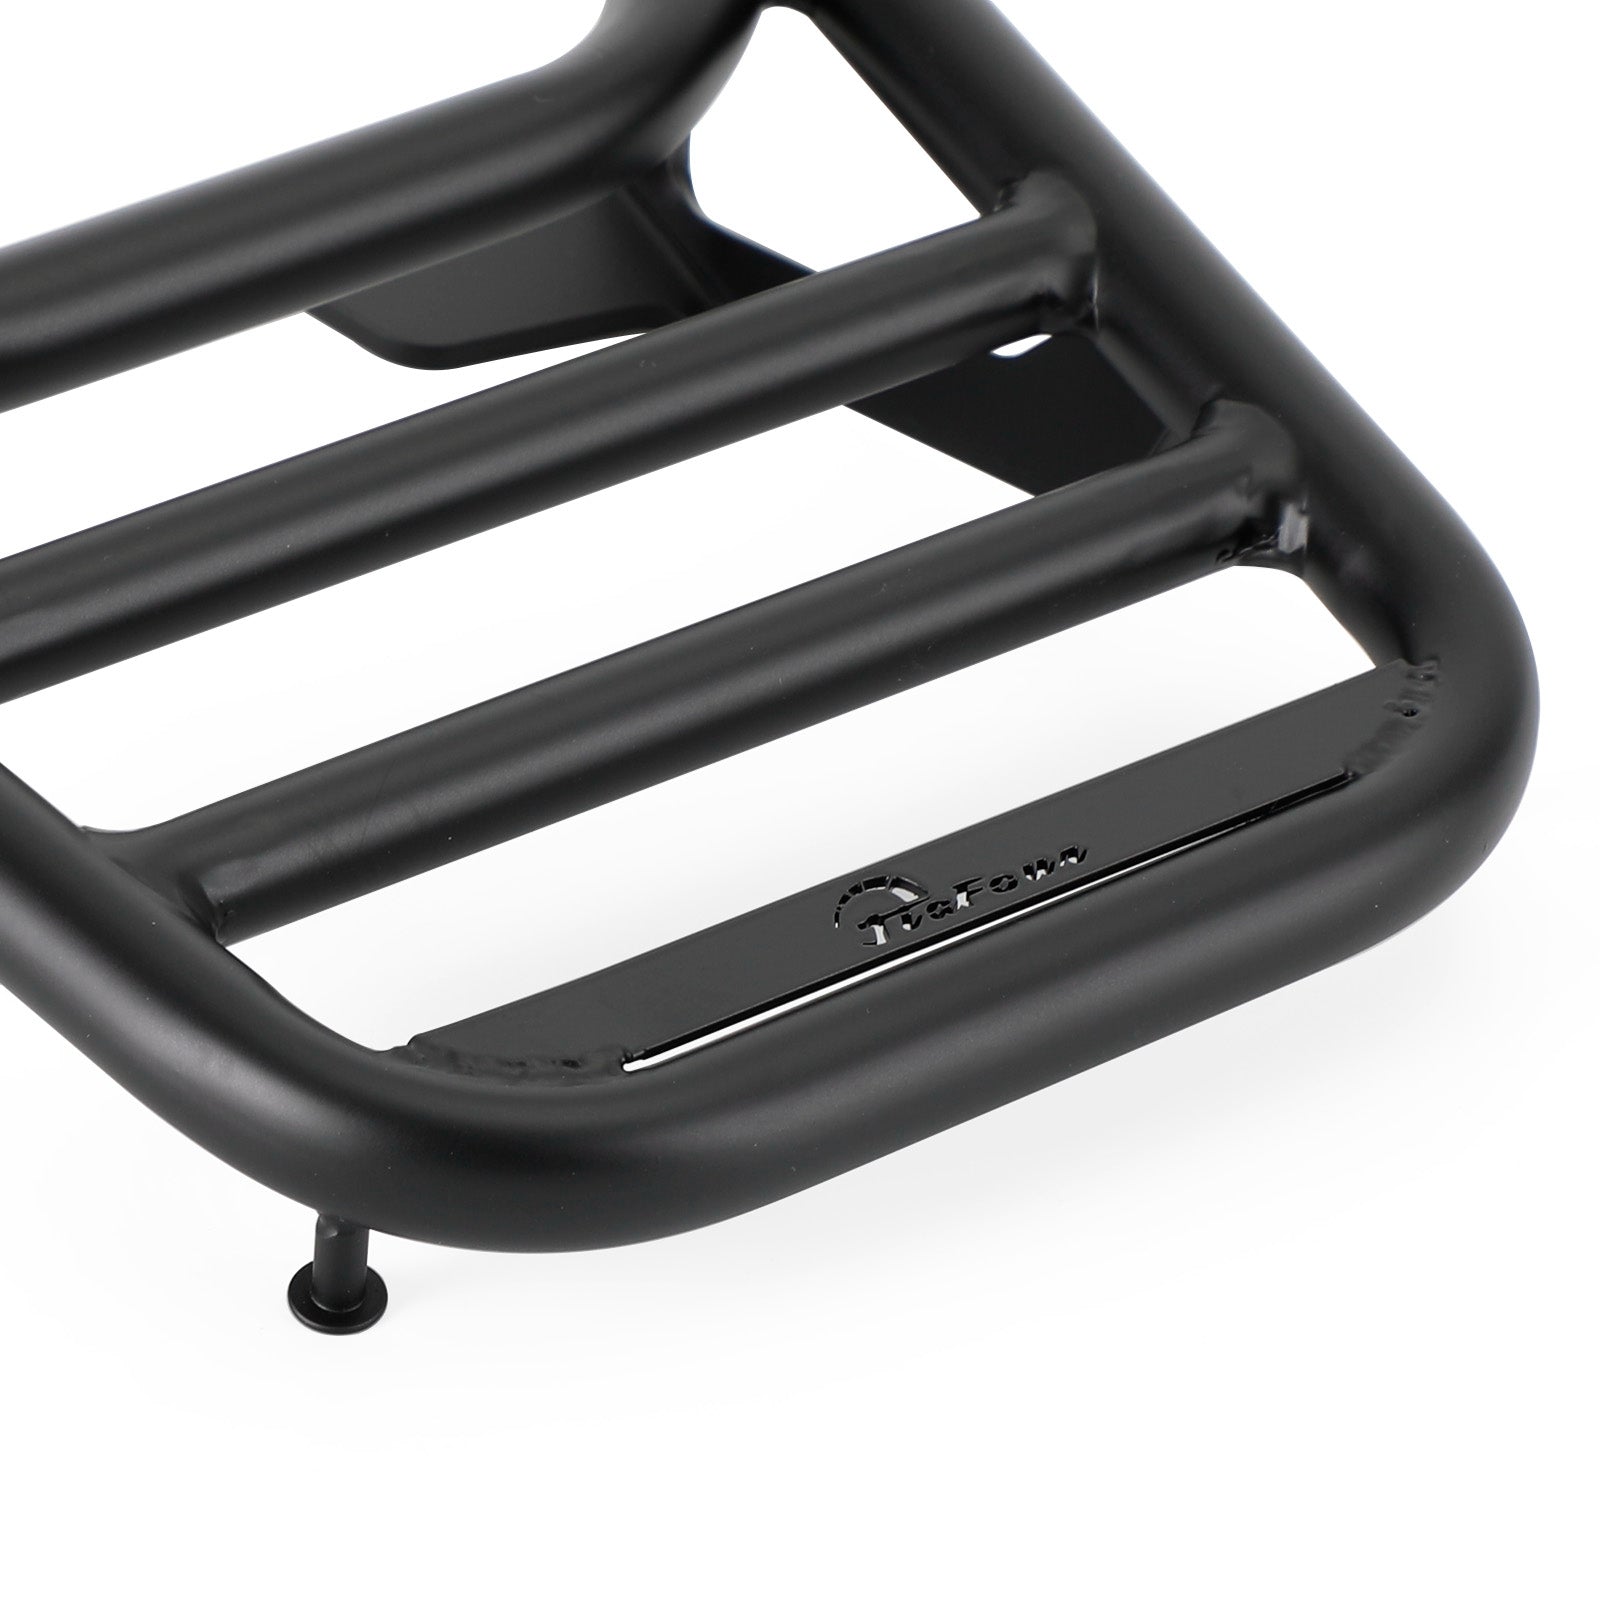 Tube Rear Rack - Black For Piaggio MP3 300 HPE Sport 15-22 Luggage Carry Rack